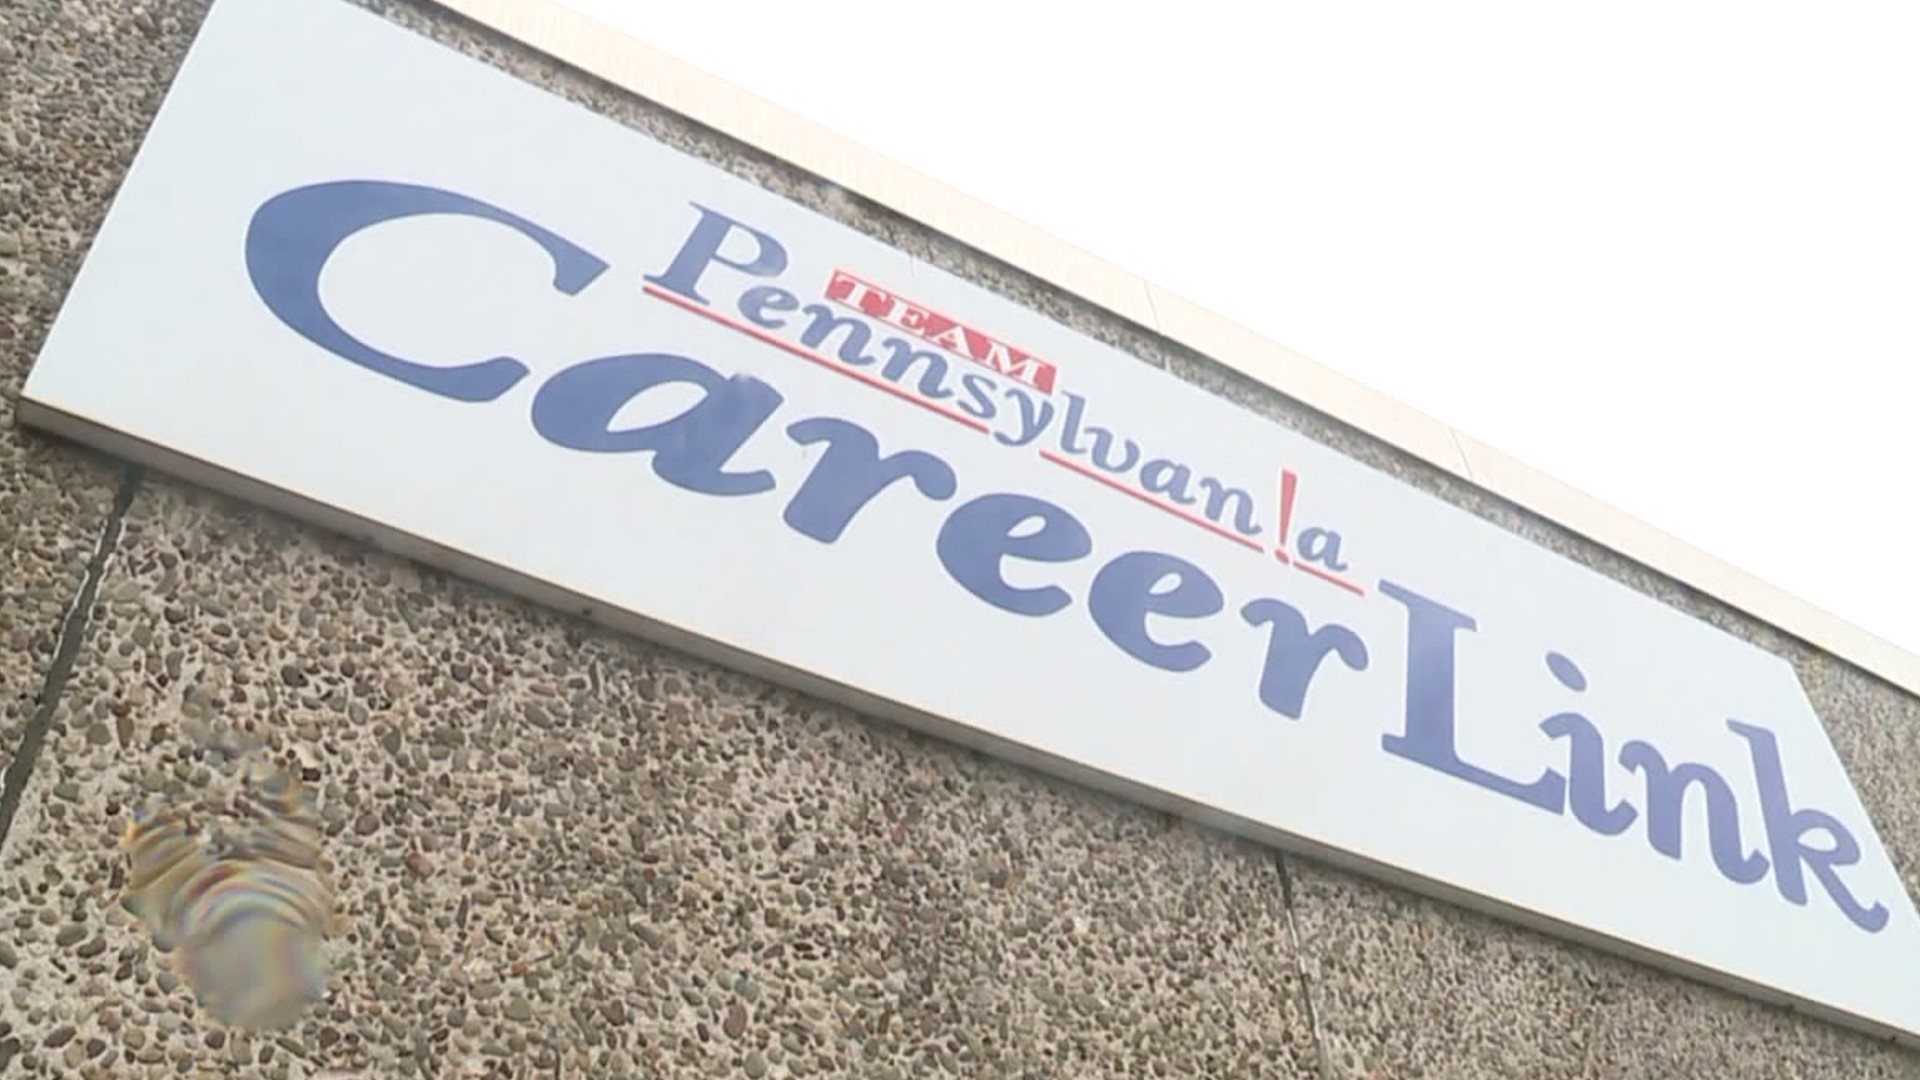 More than a year into the pandemic, how's the job market in northeastern Pennsylvania? Newswatch 16's Sarah Buynovsky spoke with an expert to find out.